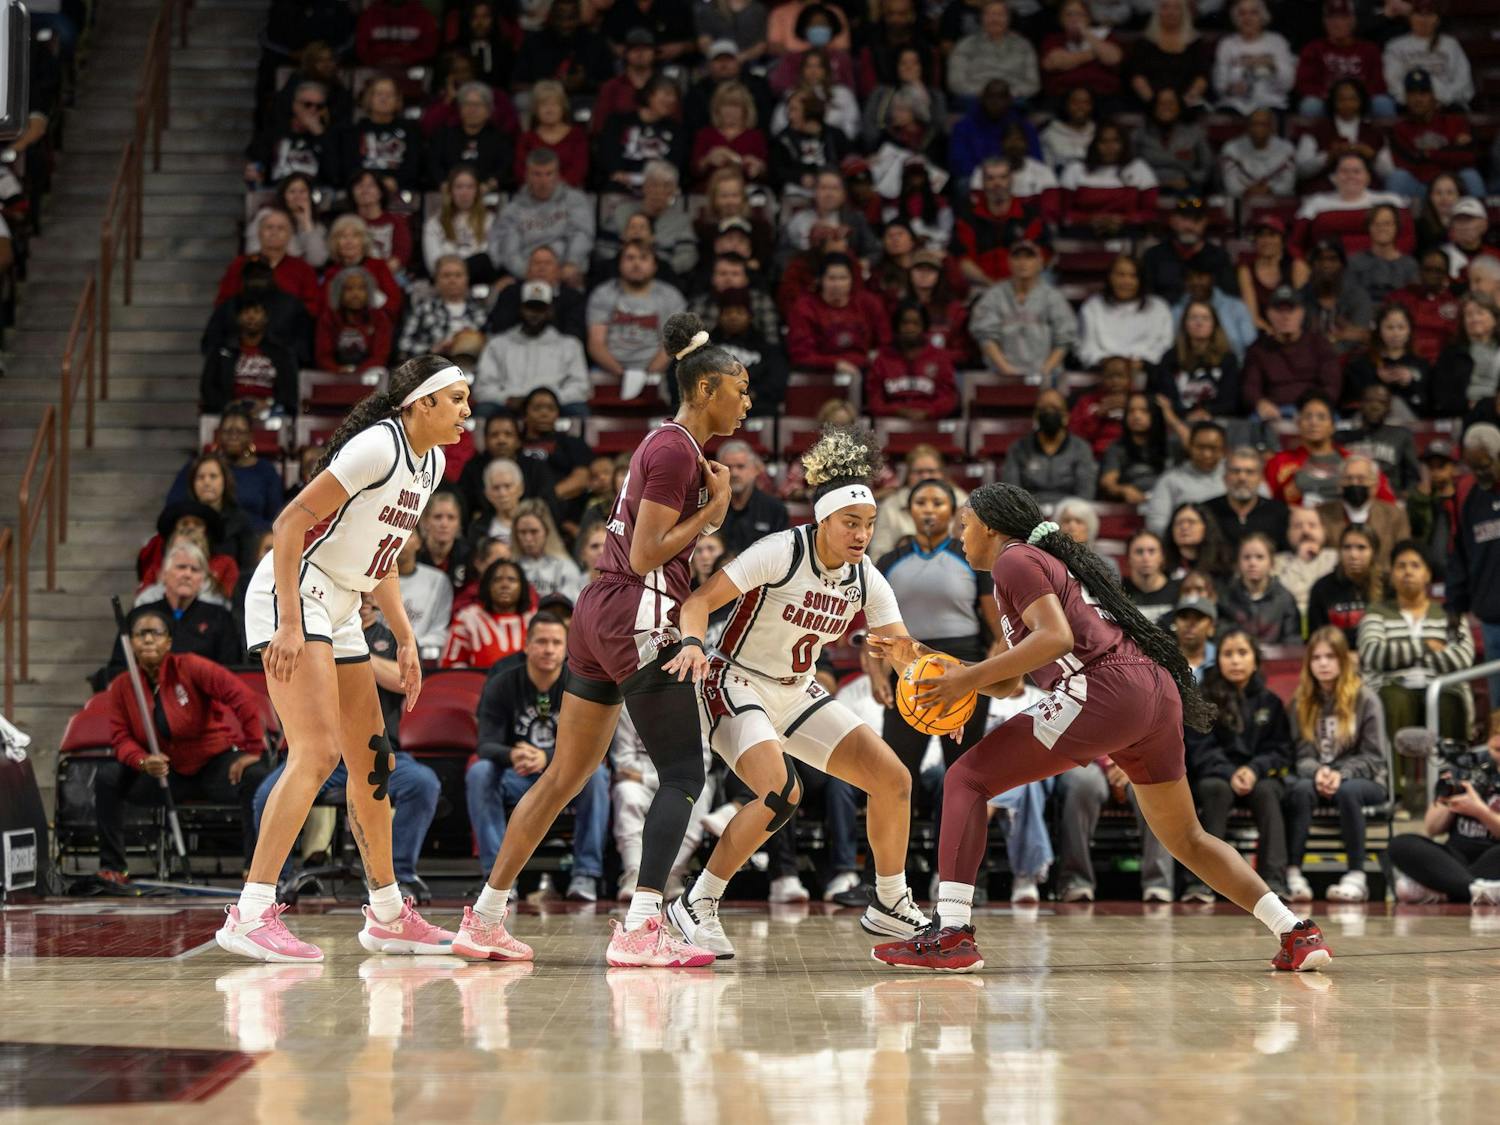 Mississippi State sophomore guard Debreasha Powe attempts to dribble the ball through South Carolina senior guard Te-Hina Paopao at Colonial Life Arena on Jan. 7, 2024. Paopao scored 12 points for the Gamecocks in its 85-66 victory over the Bulldogs.